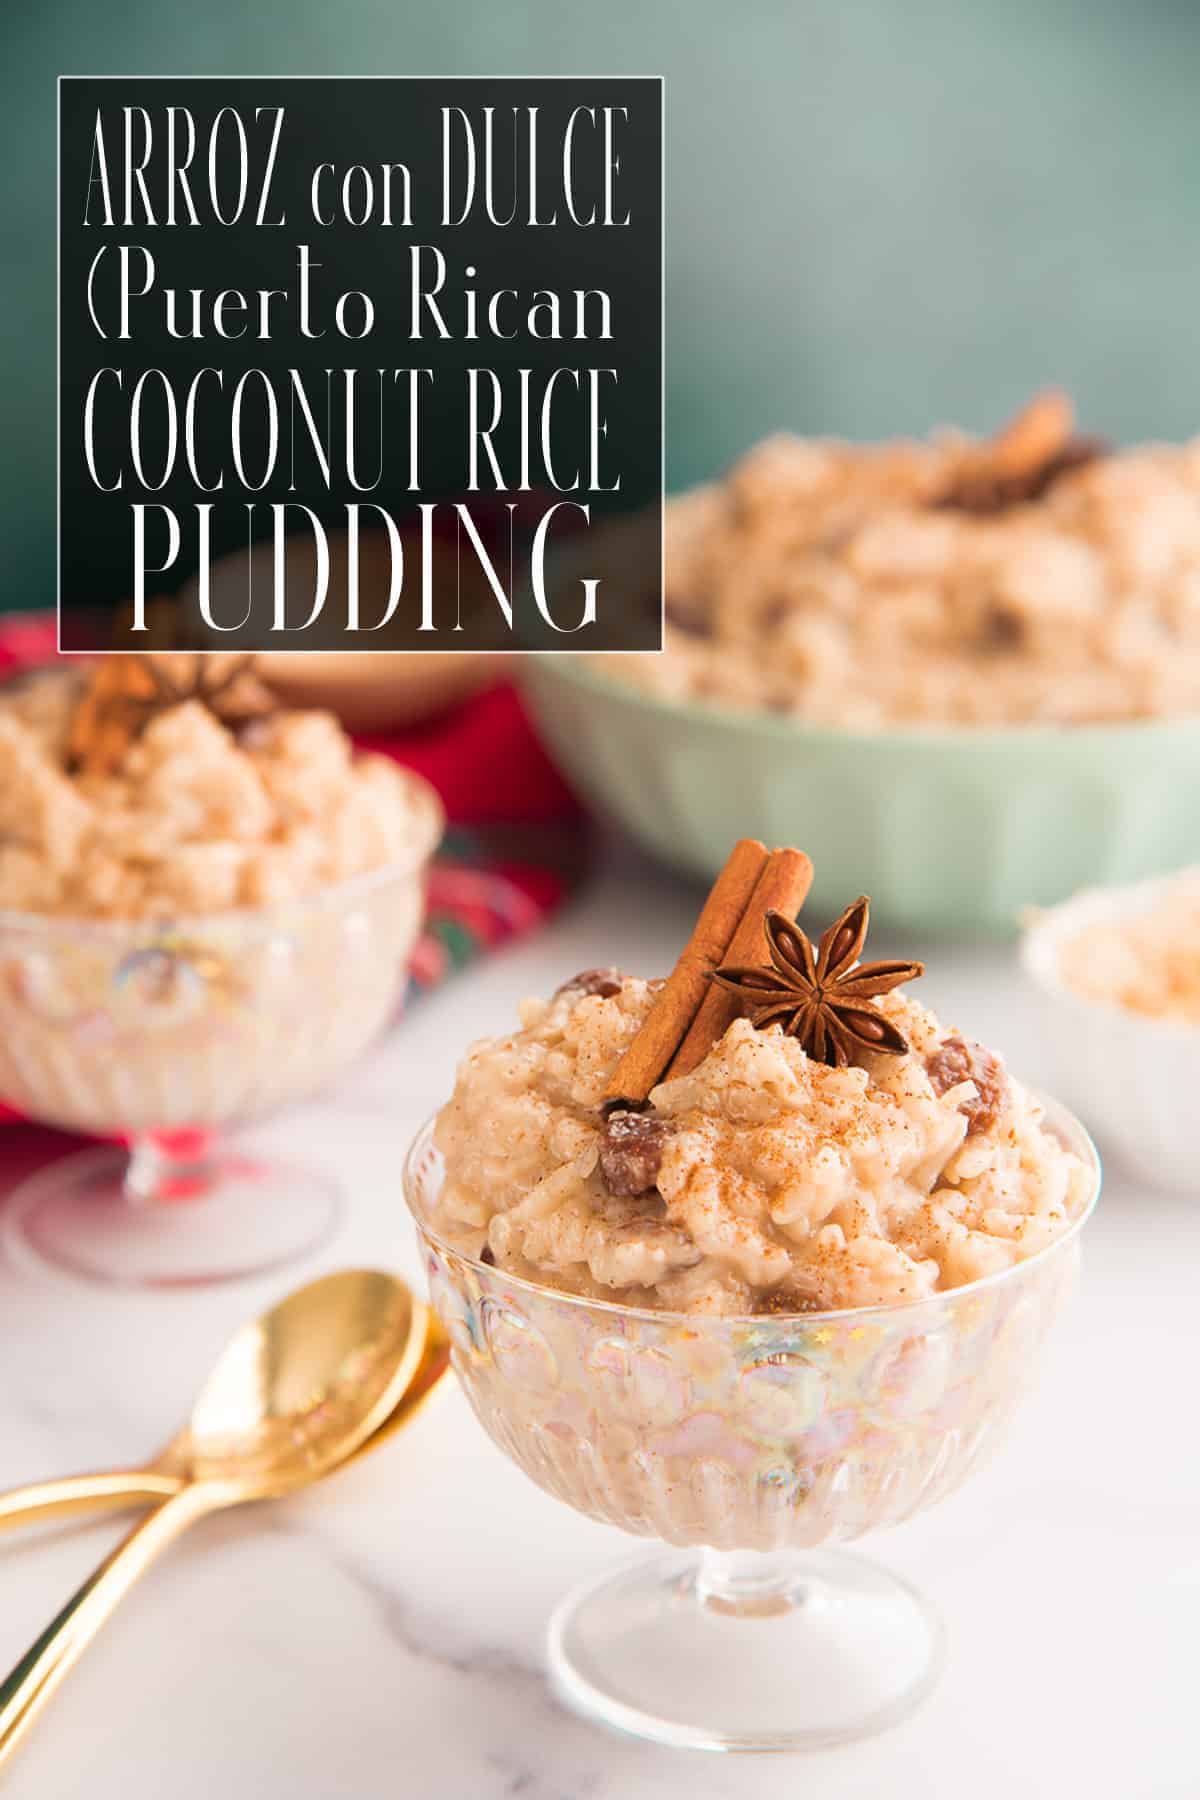 Is a favorite Puerto Rican  dessert made with coconut milk rice  and raisins. Is sweetly spiced treat is popular during the holiday season. It comes together. #arrozcondulce #ricepudding #coconutricepudding #pudding #postresNavidenos #postrestipicos #platostipicos #recetastipicas #recetasNavidenas #postrespuertorriquenos #raisins #coconutmilk  #holidaydesserts #holidayrecipe #postres   #sweets #colddesert #PuertoRico #PuertoRicandessert #Dominicandessert #Cubandessert #Hispanicdessert #LatinAmericanDesserts
 via @ediblesense